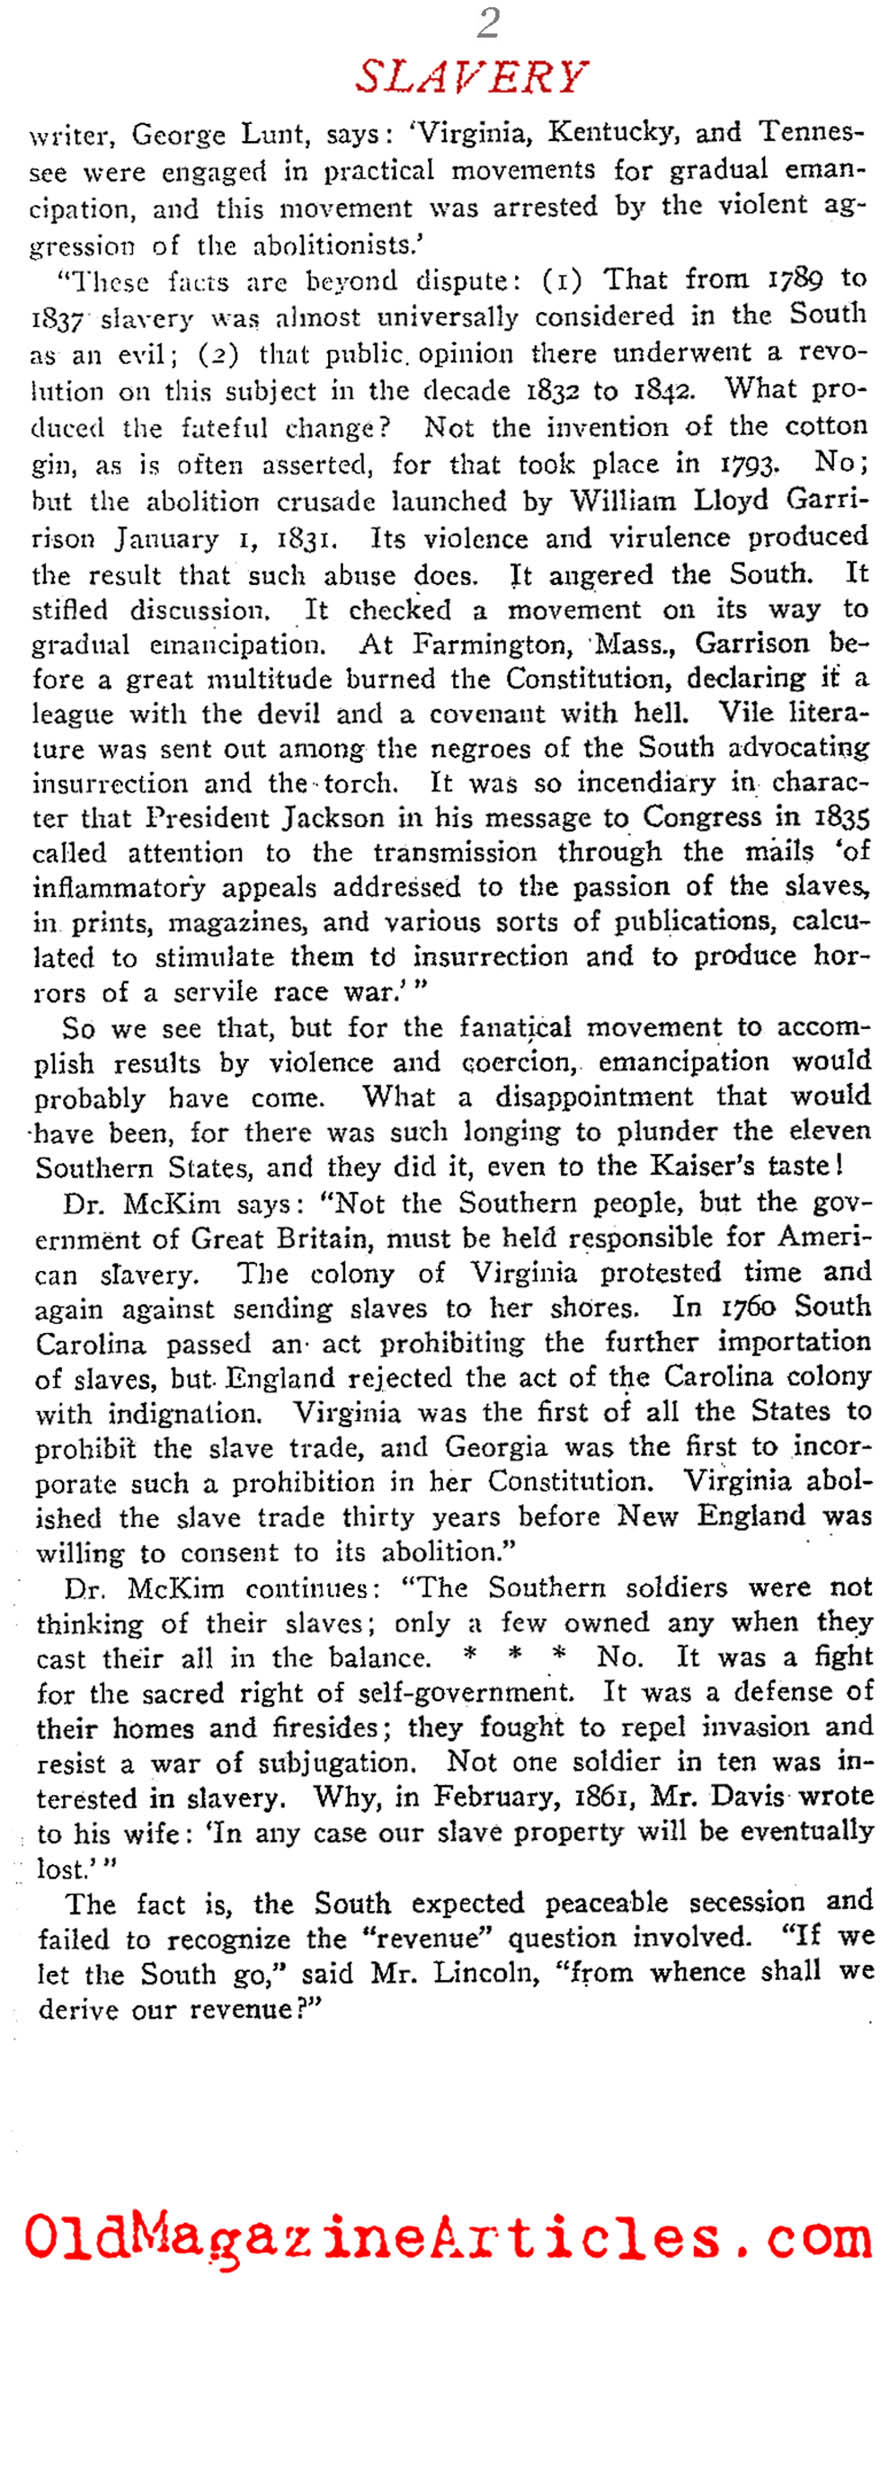 Why The Rebels Fought (Confederate Veteran Magazine, 1918)